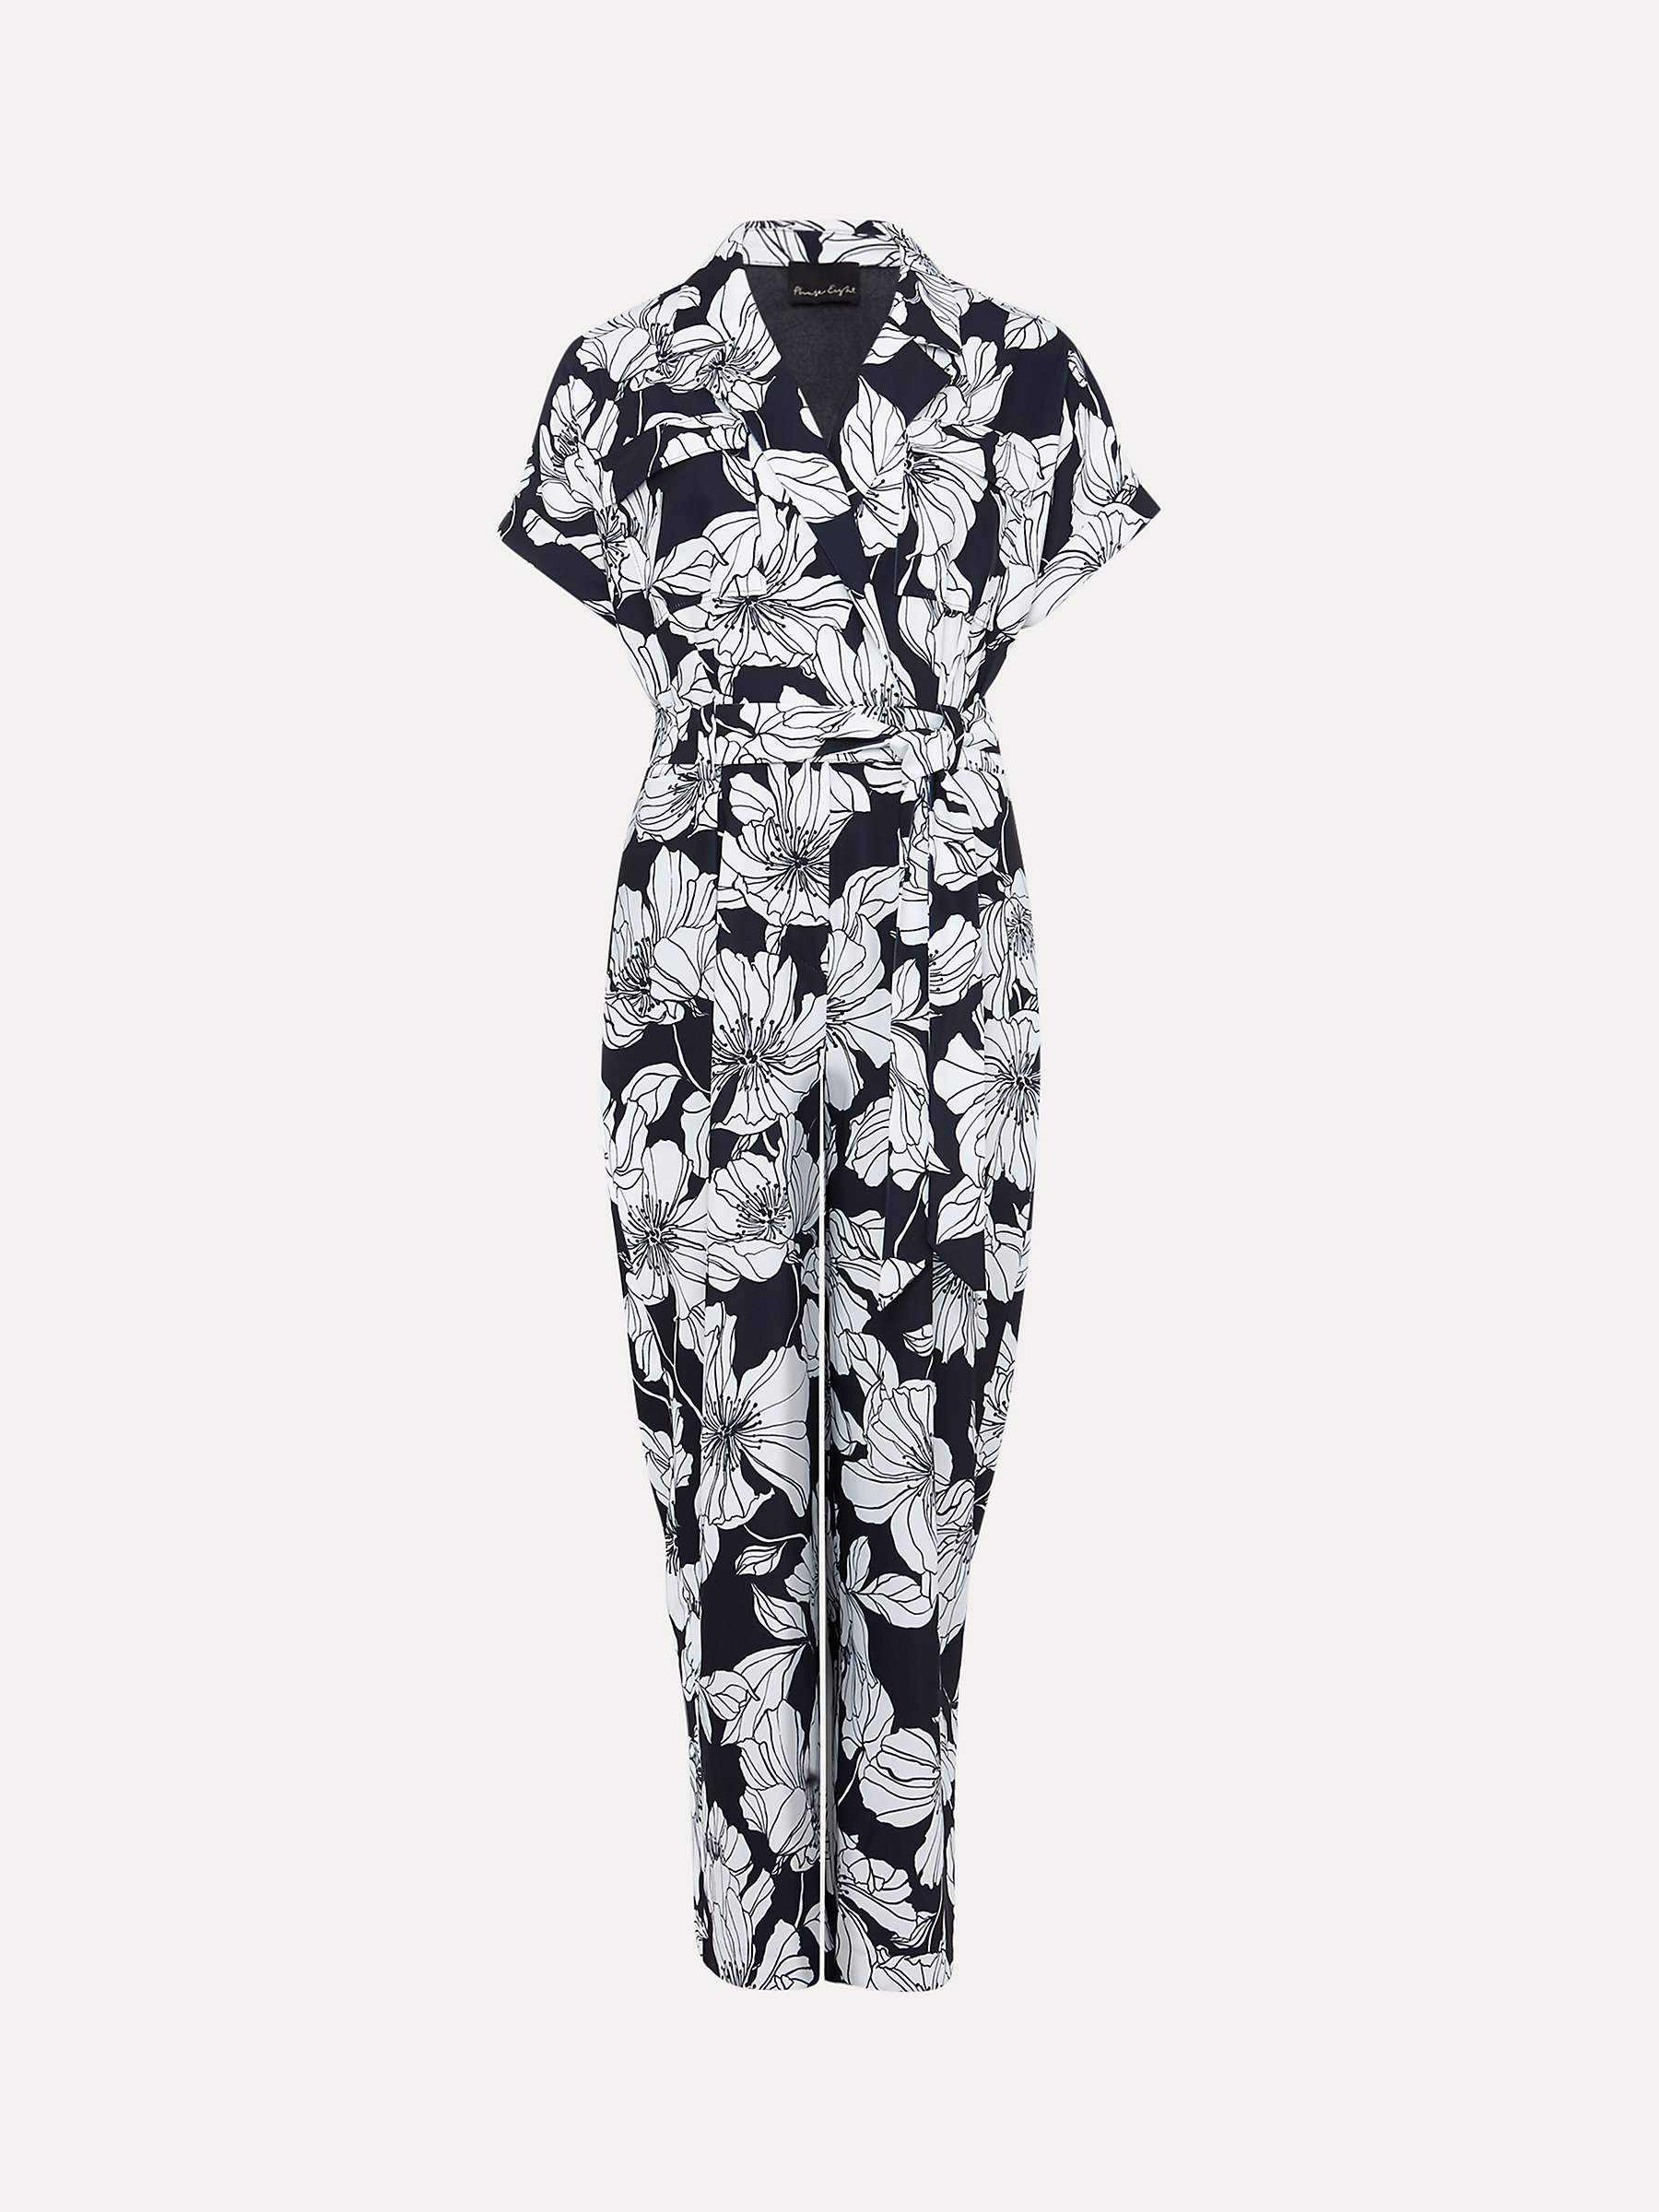 Buy Phase Eight Petite Constance Floral Jumpsuit, Navy/Ivory Online at johnlewis.com